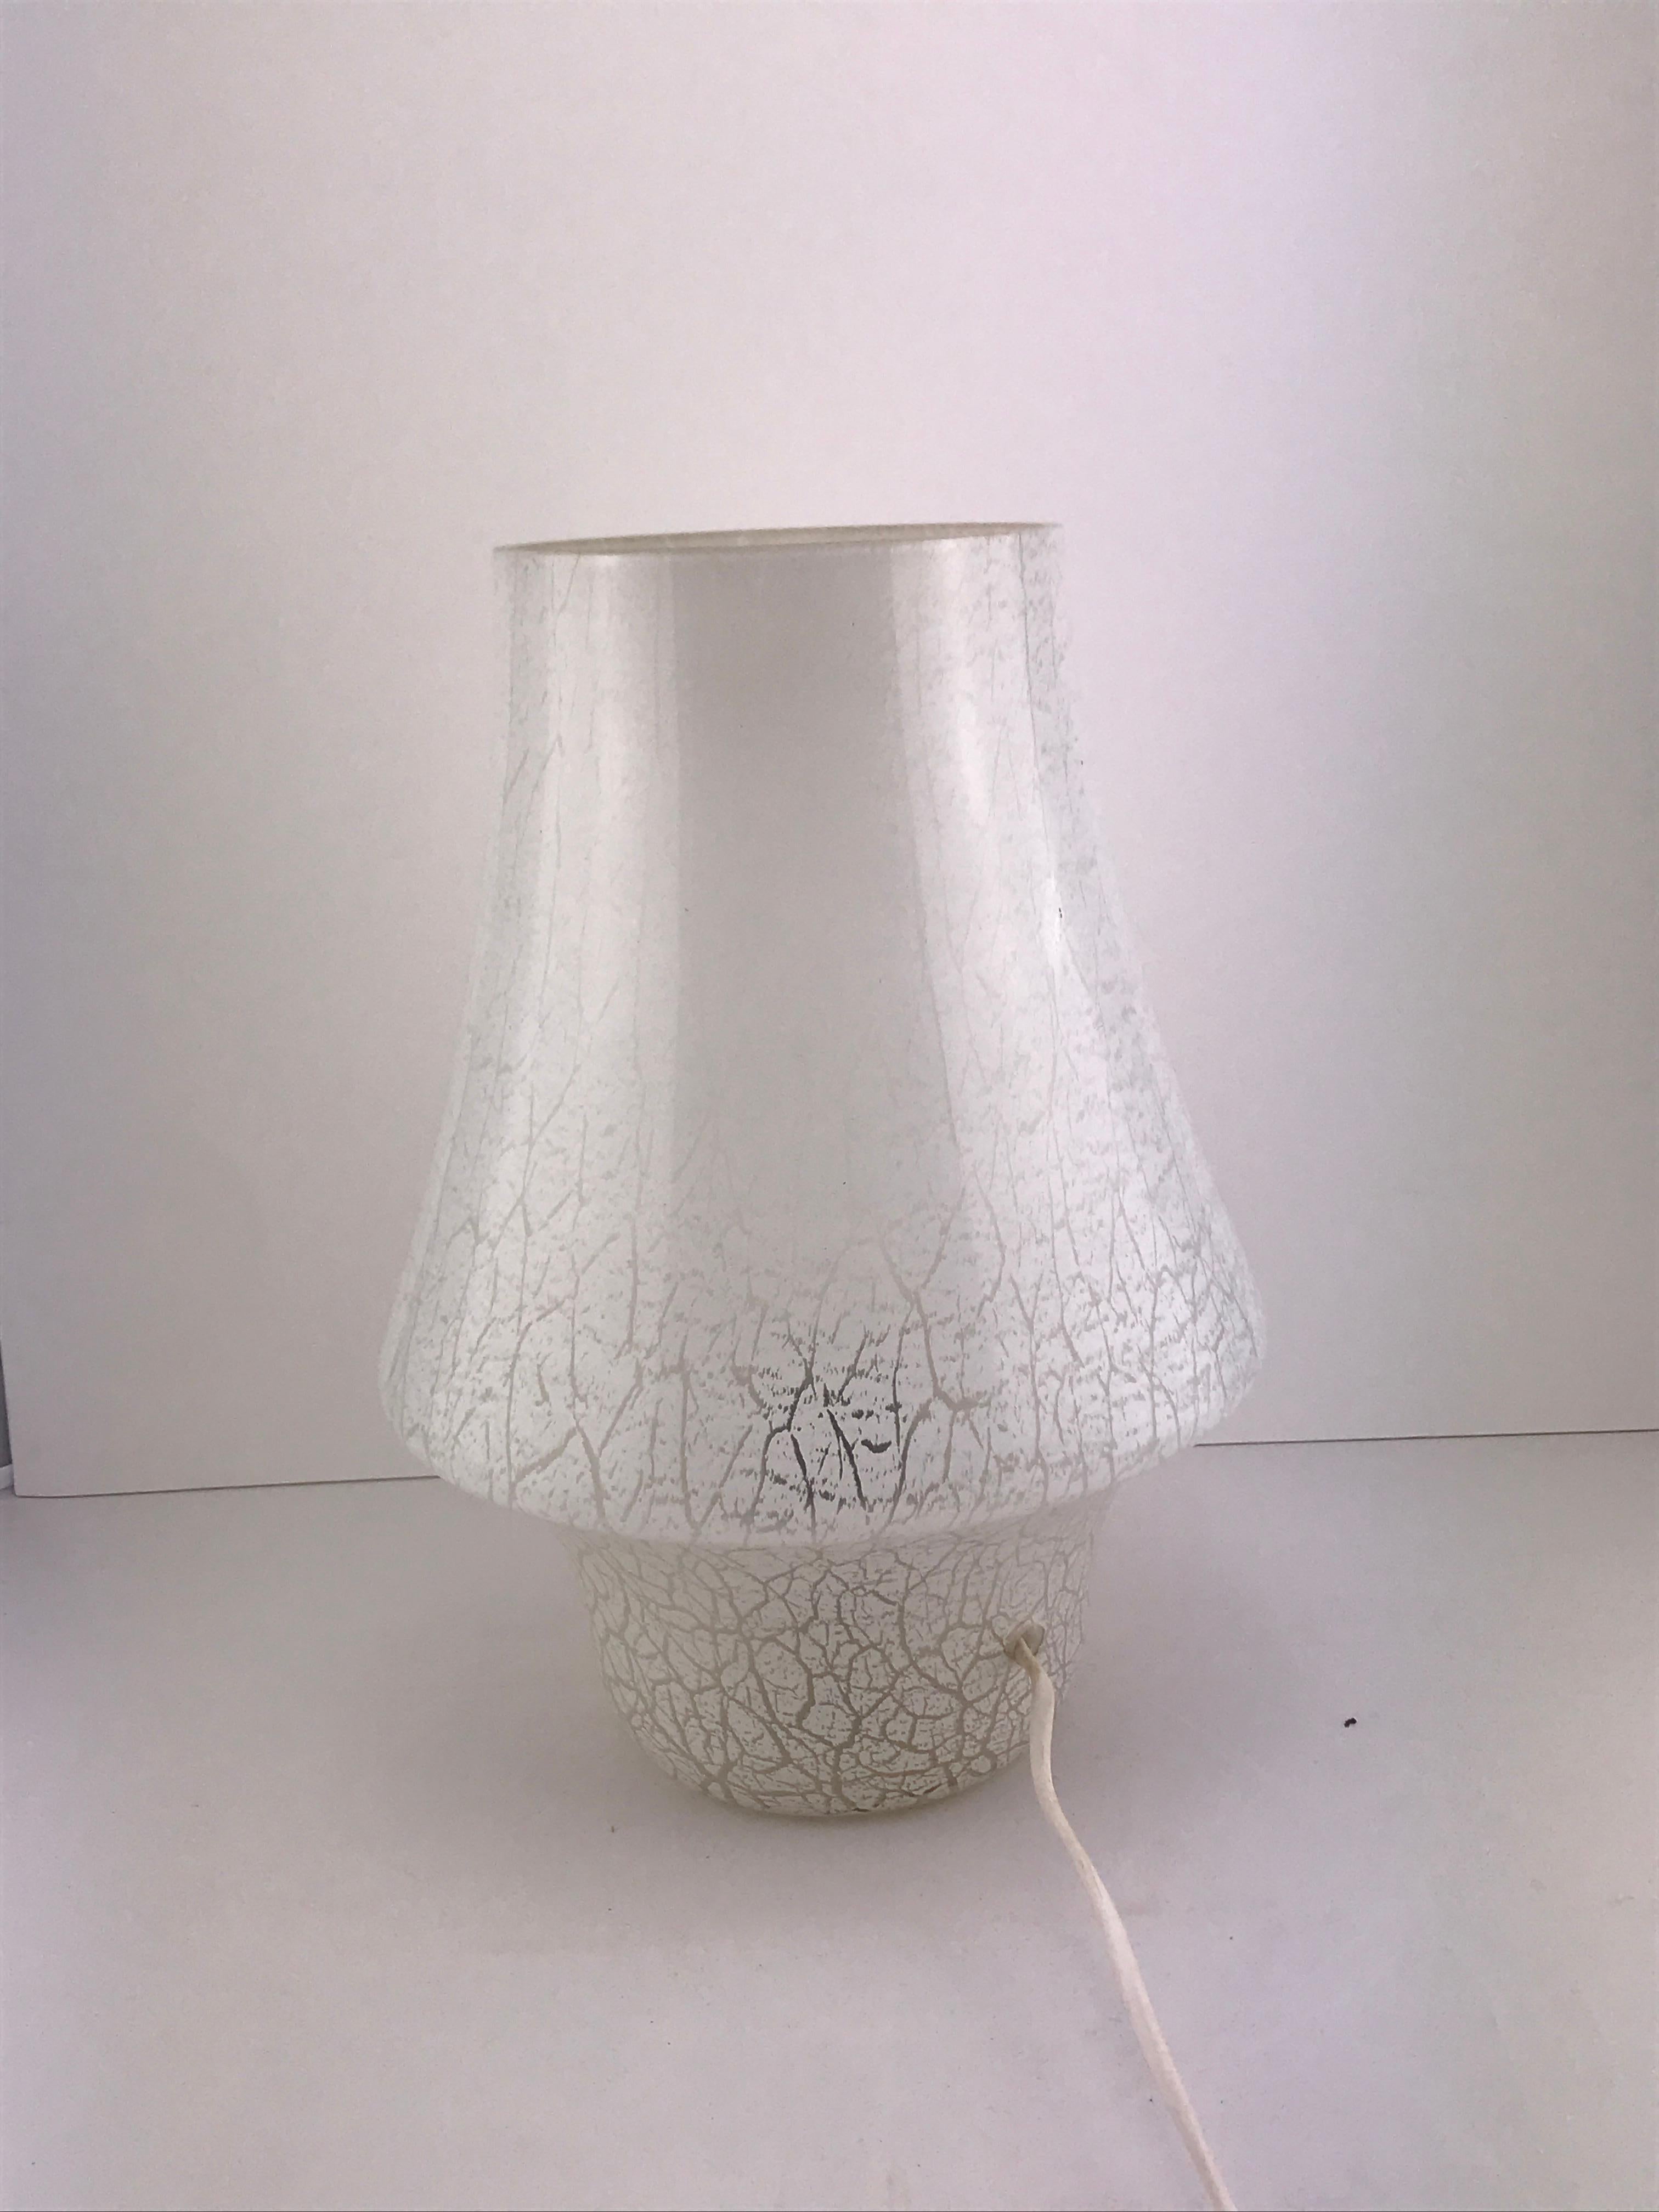 Mushroom Italian lamp in Murano glass, 1960s.
Good condition considering the age the white glass is still very beautiful and the light the come out is nice and gentle not invasive at all and makes this lamp perfect for a bedroom.  
  